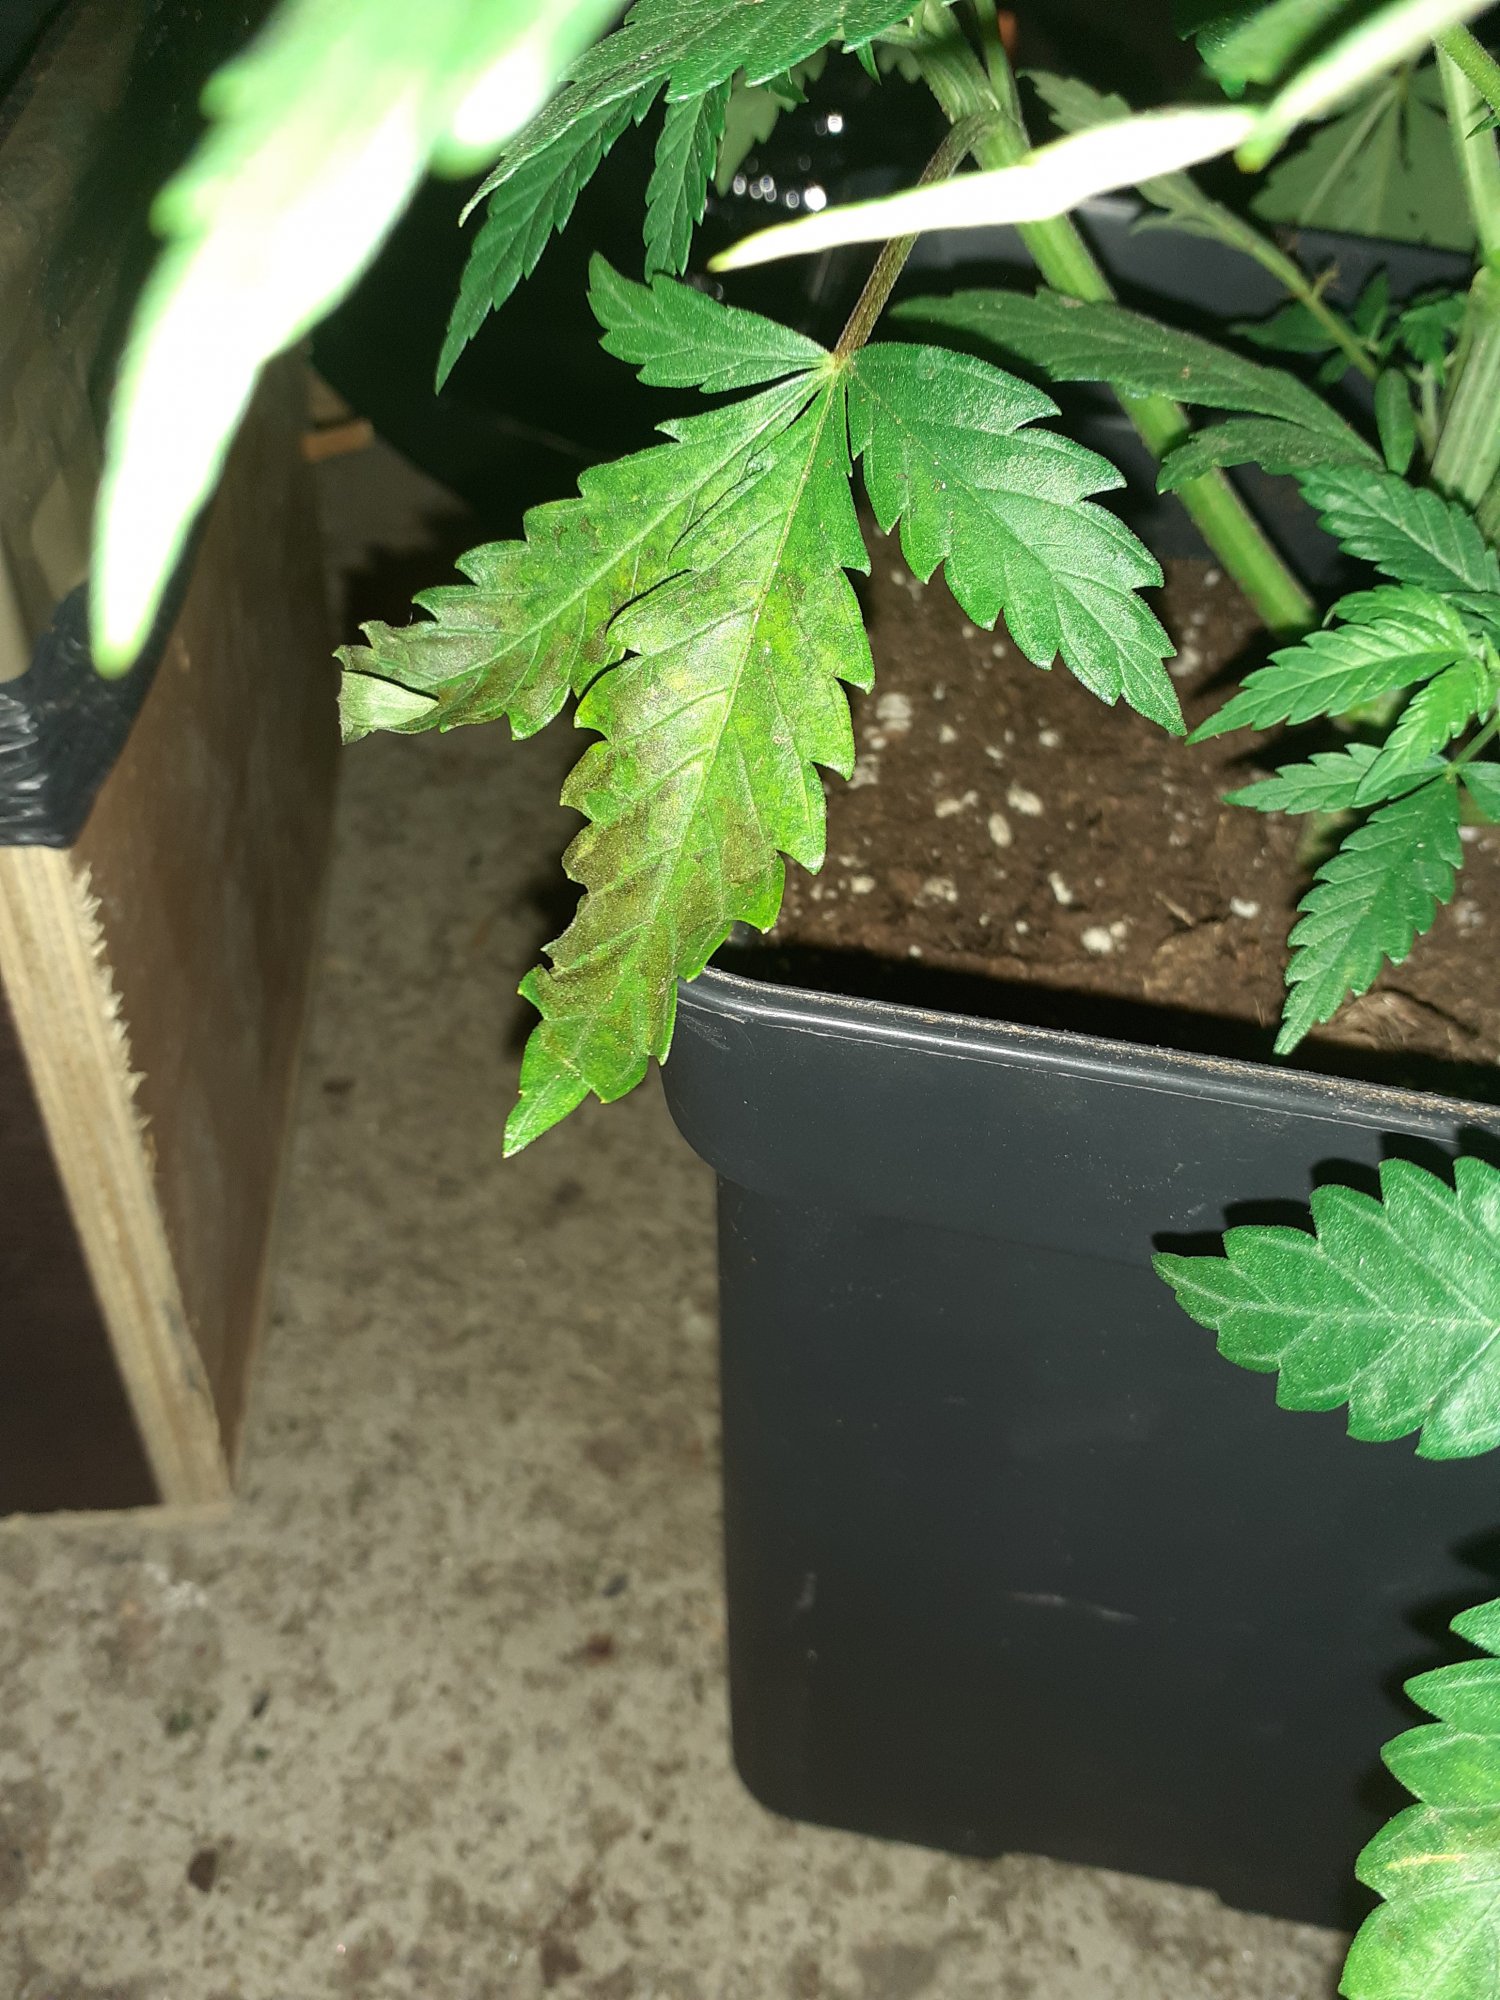 Help what deficiency is this 2